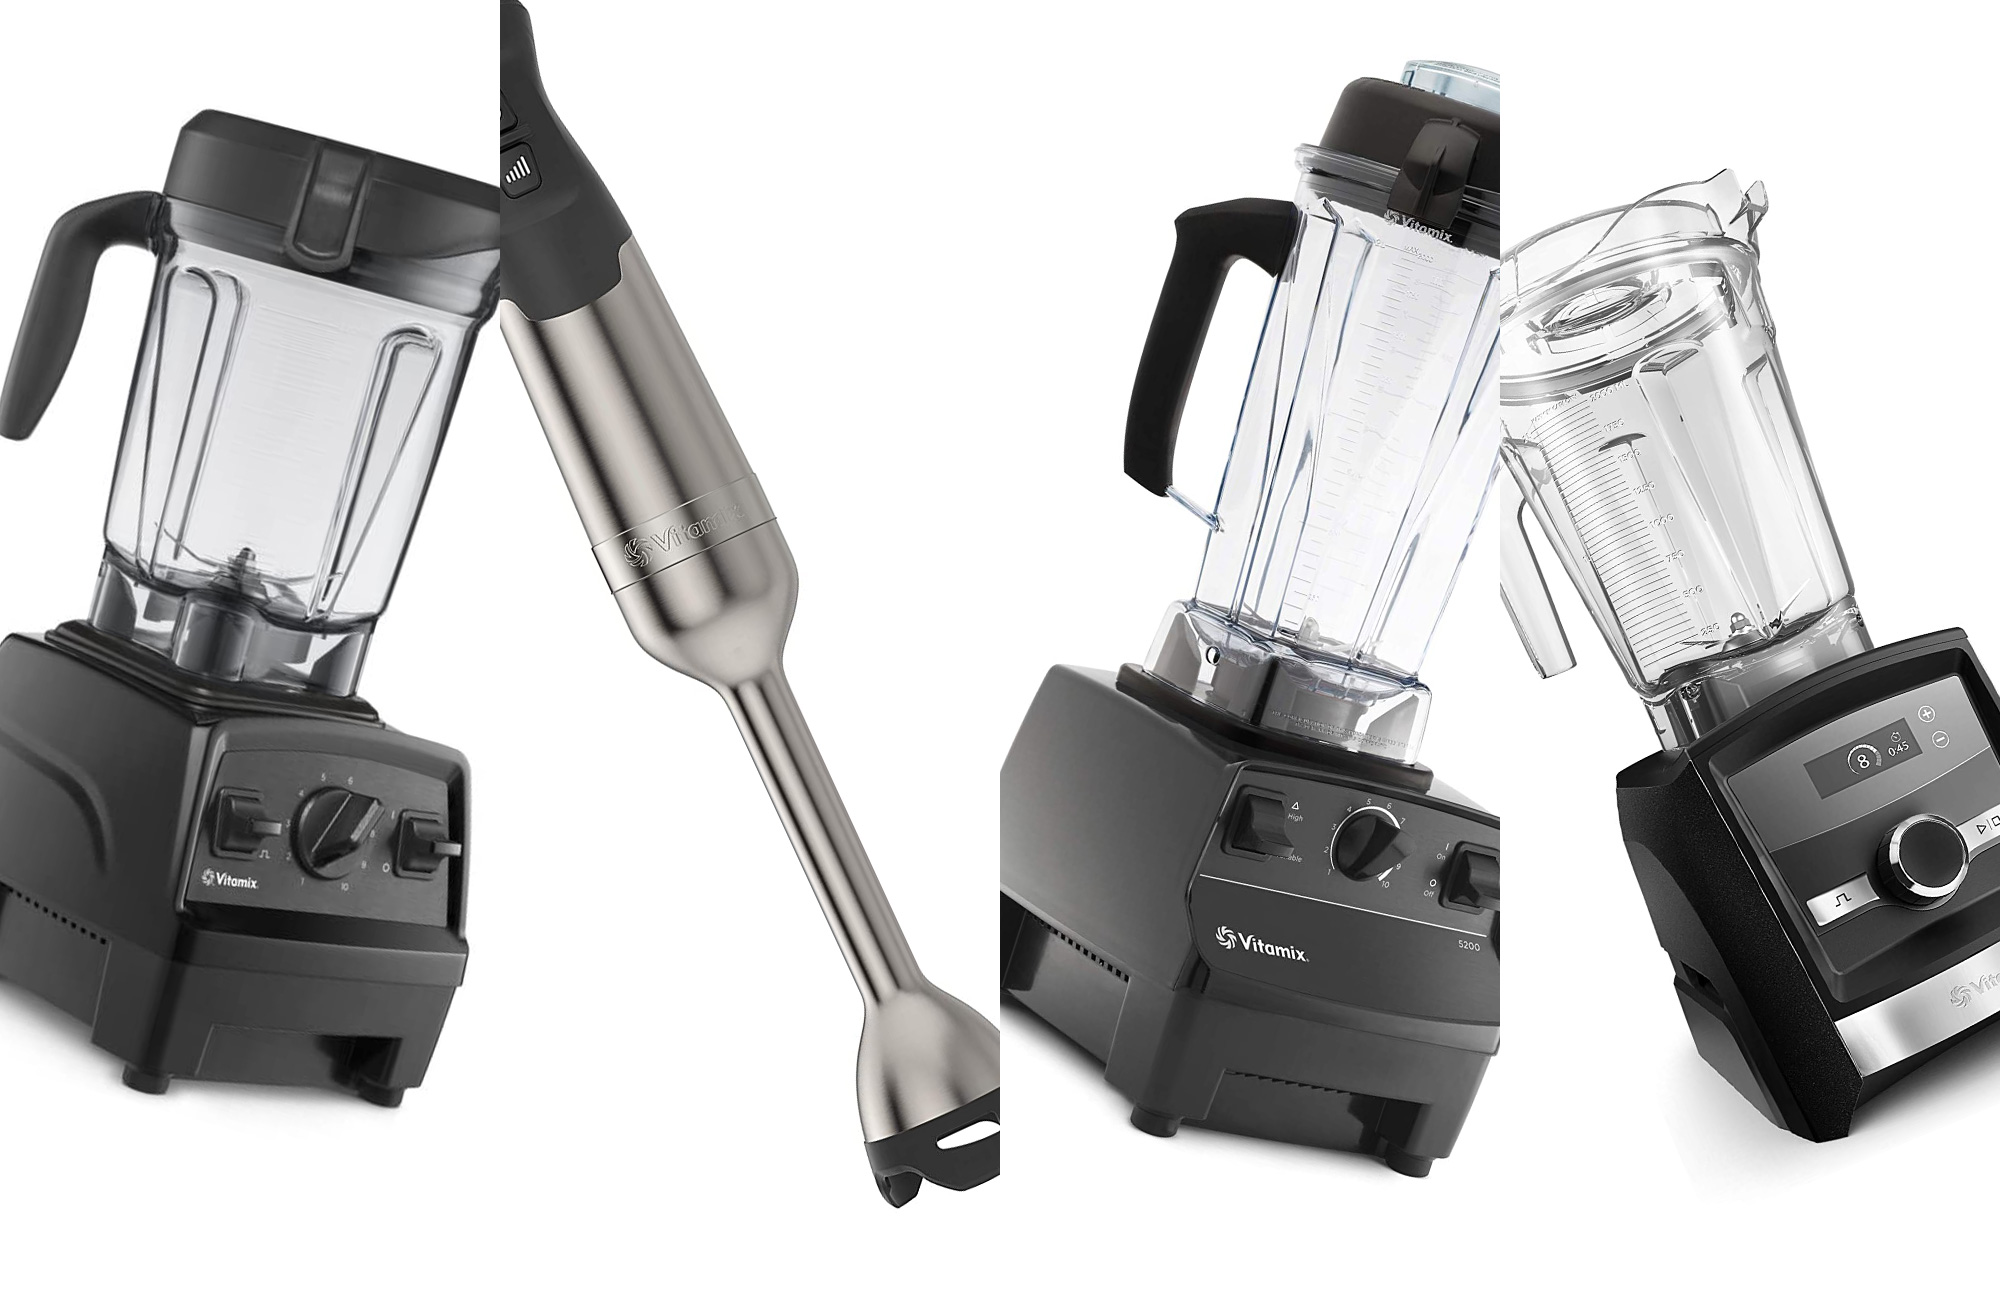 Save up to $250 with this rare Vitamix blender Black Friday deal